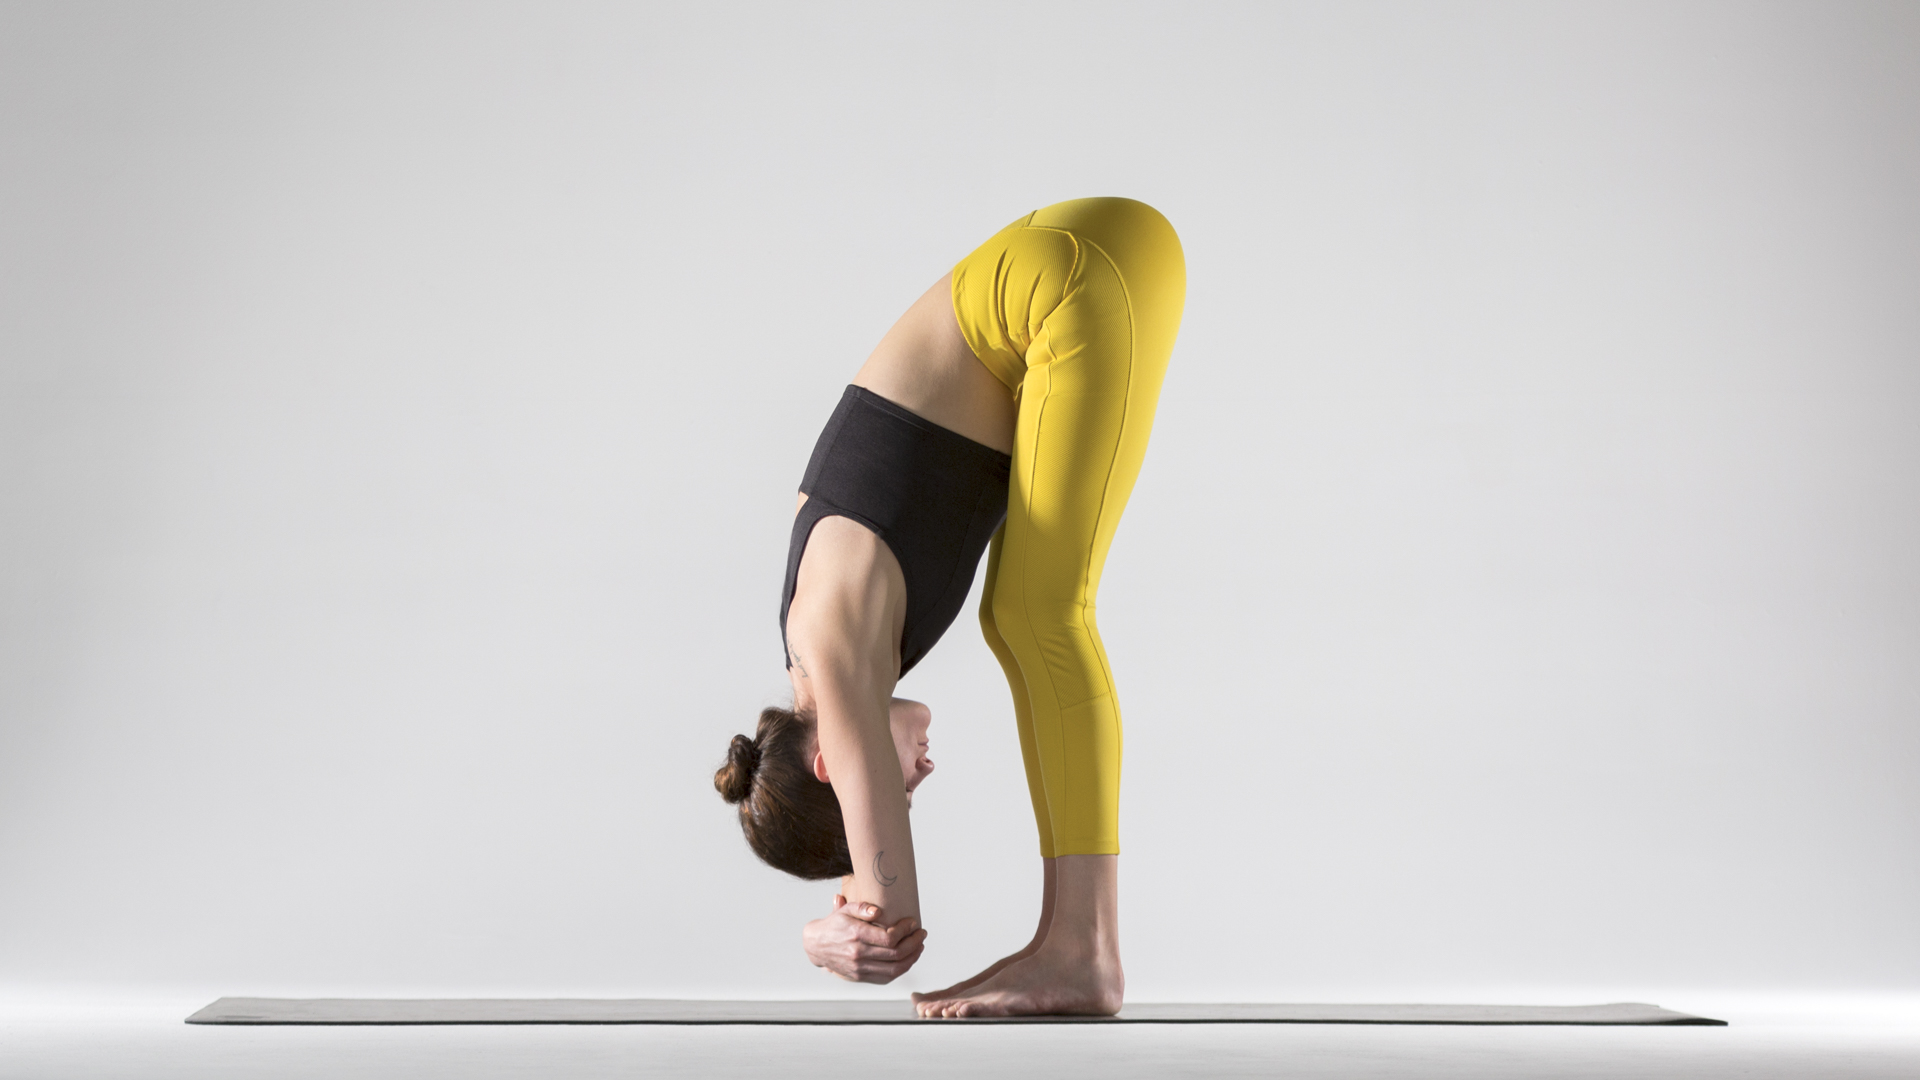 12 Advanced Yoga Poses That Are Fun to Look At (and Even More Fun to Do)